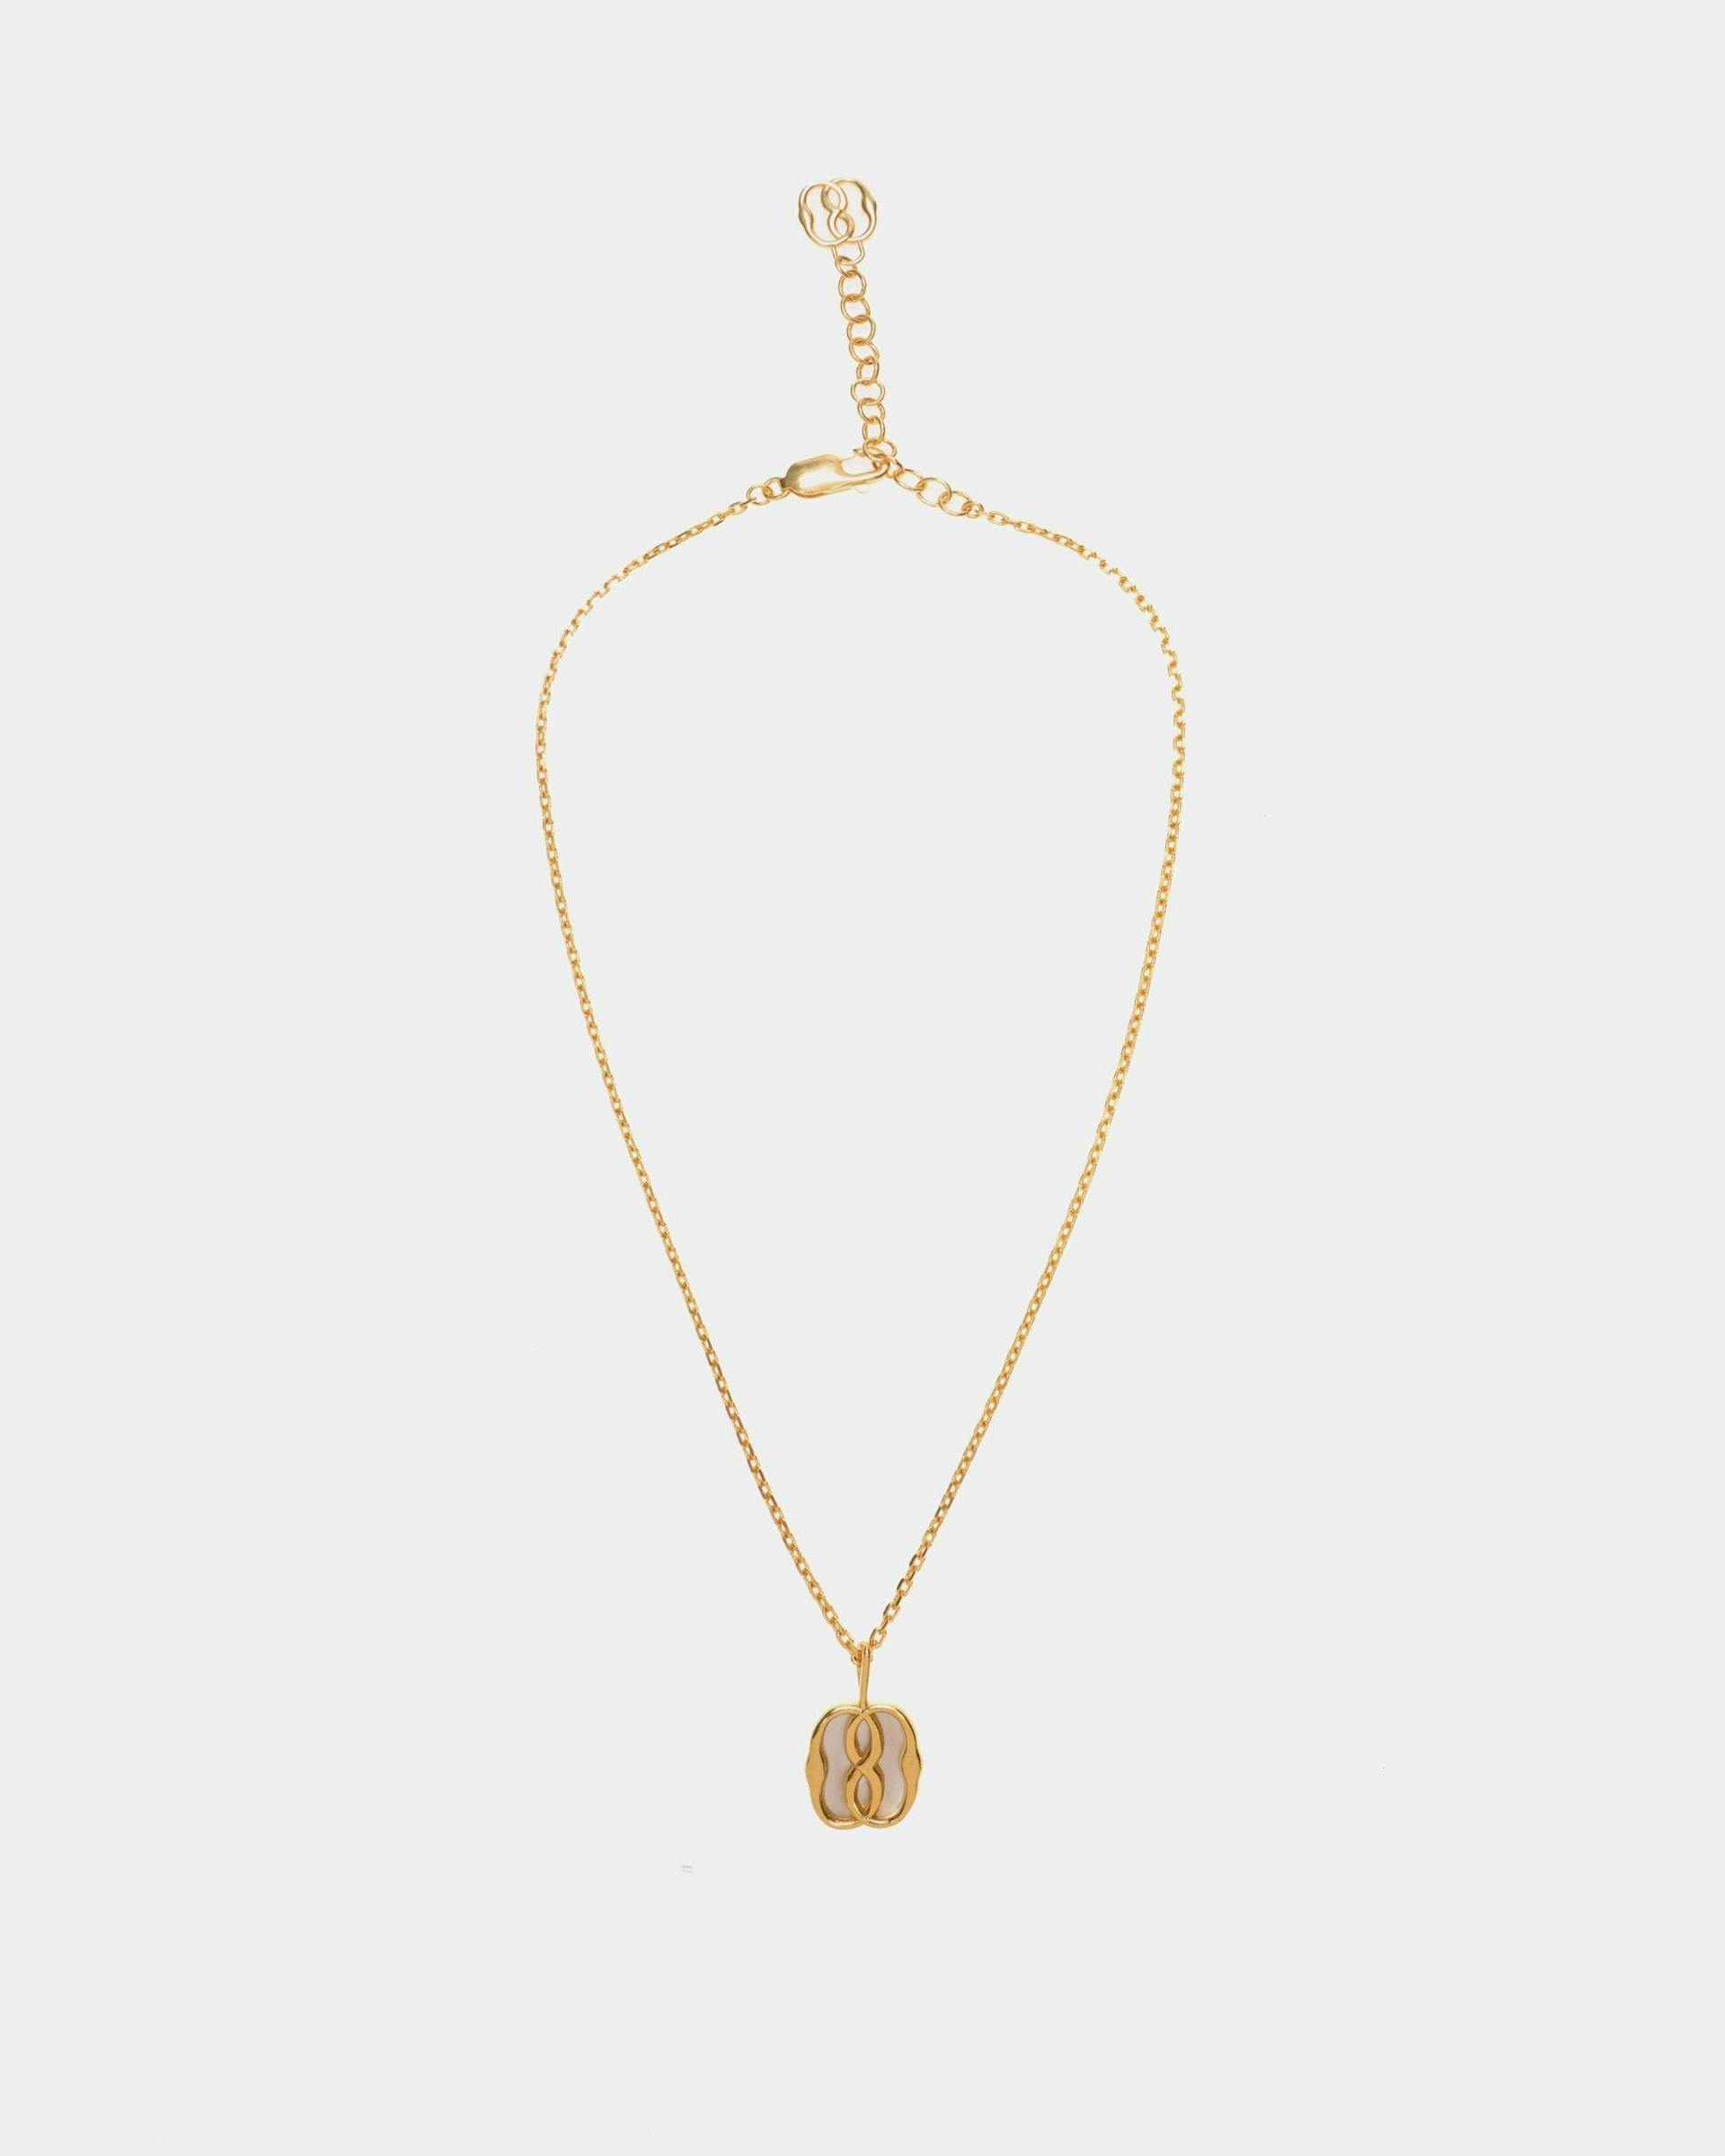 Women's Emblem Necklace in Gold-tone Eco Brass and Mother of Pearl | Bally | Still Life Front